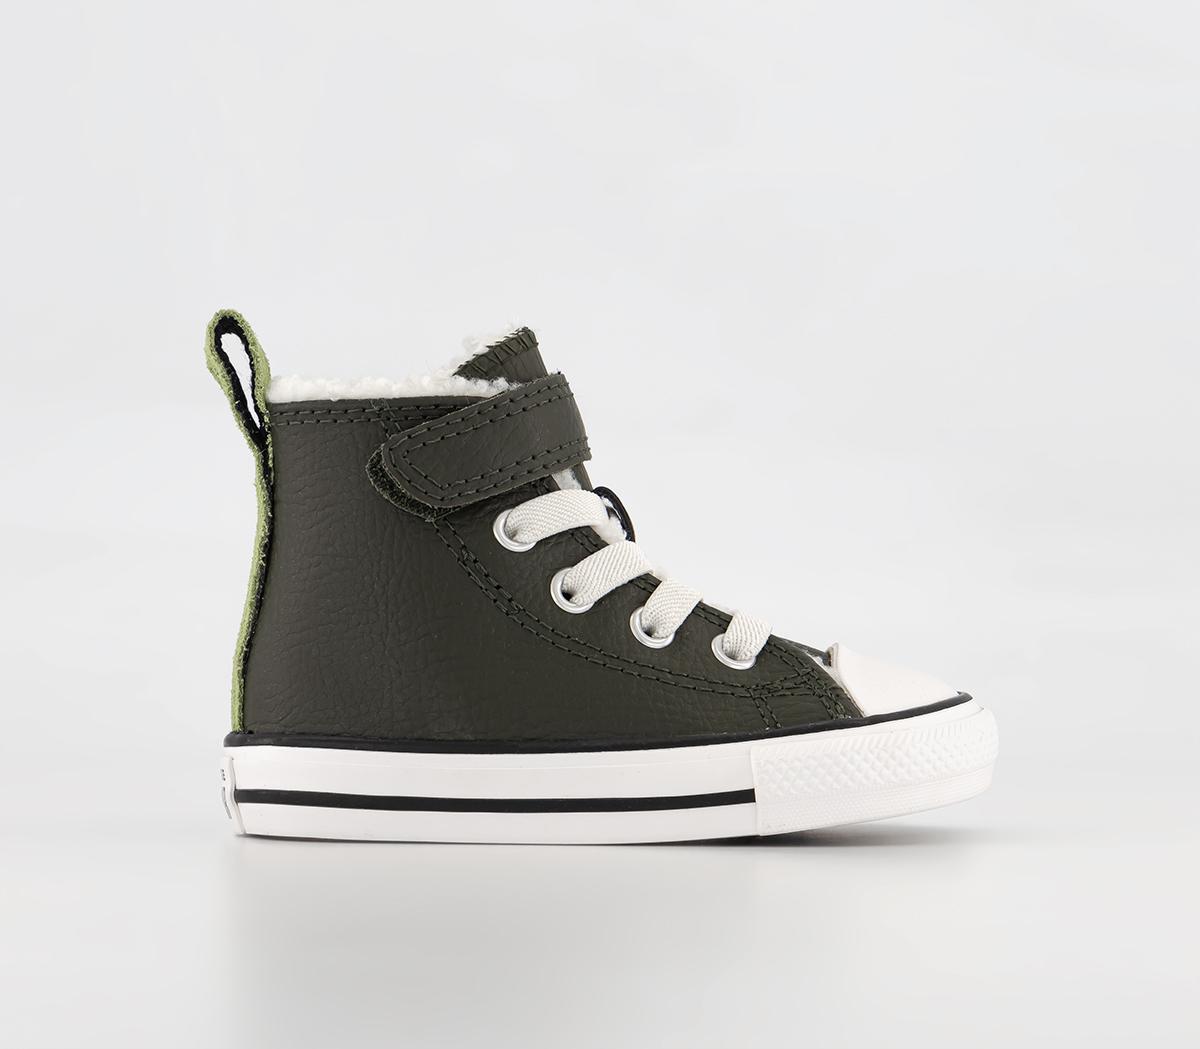 ConverseAll Star Hi 1vlace Trainers Utility Green Aloe Green Lined